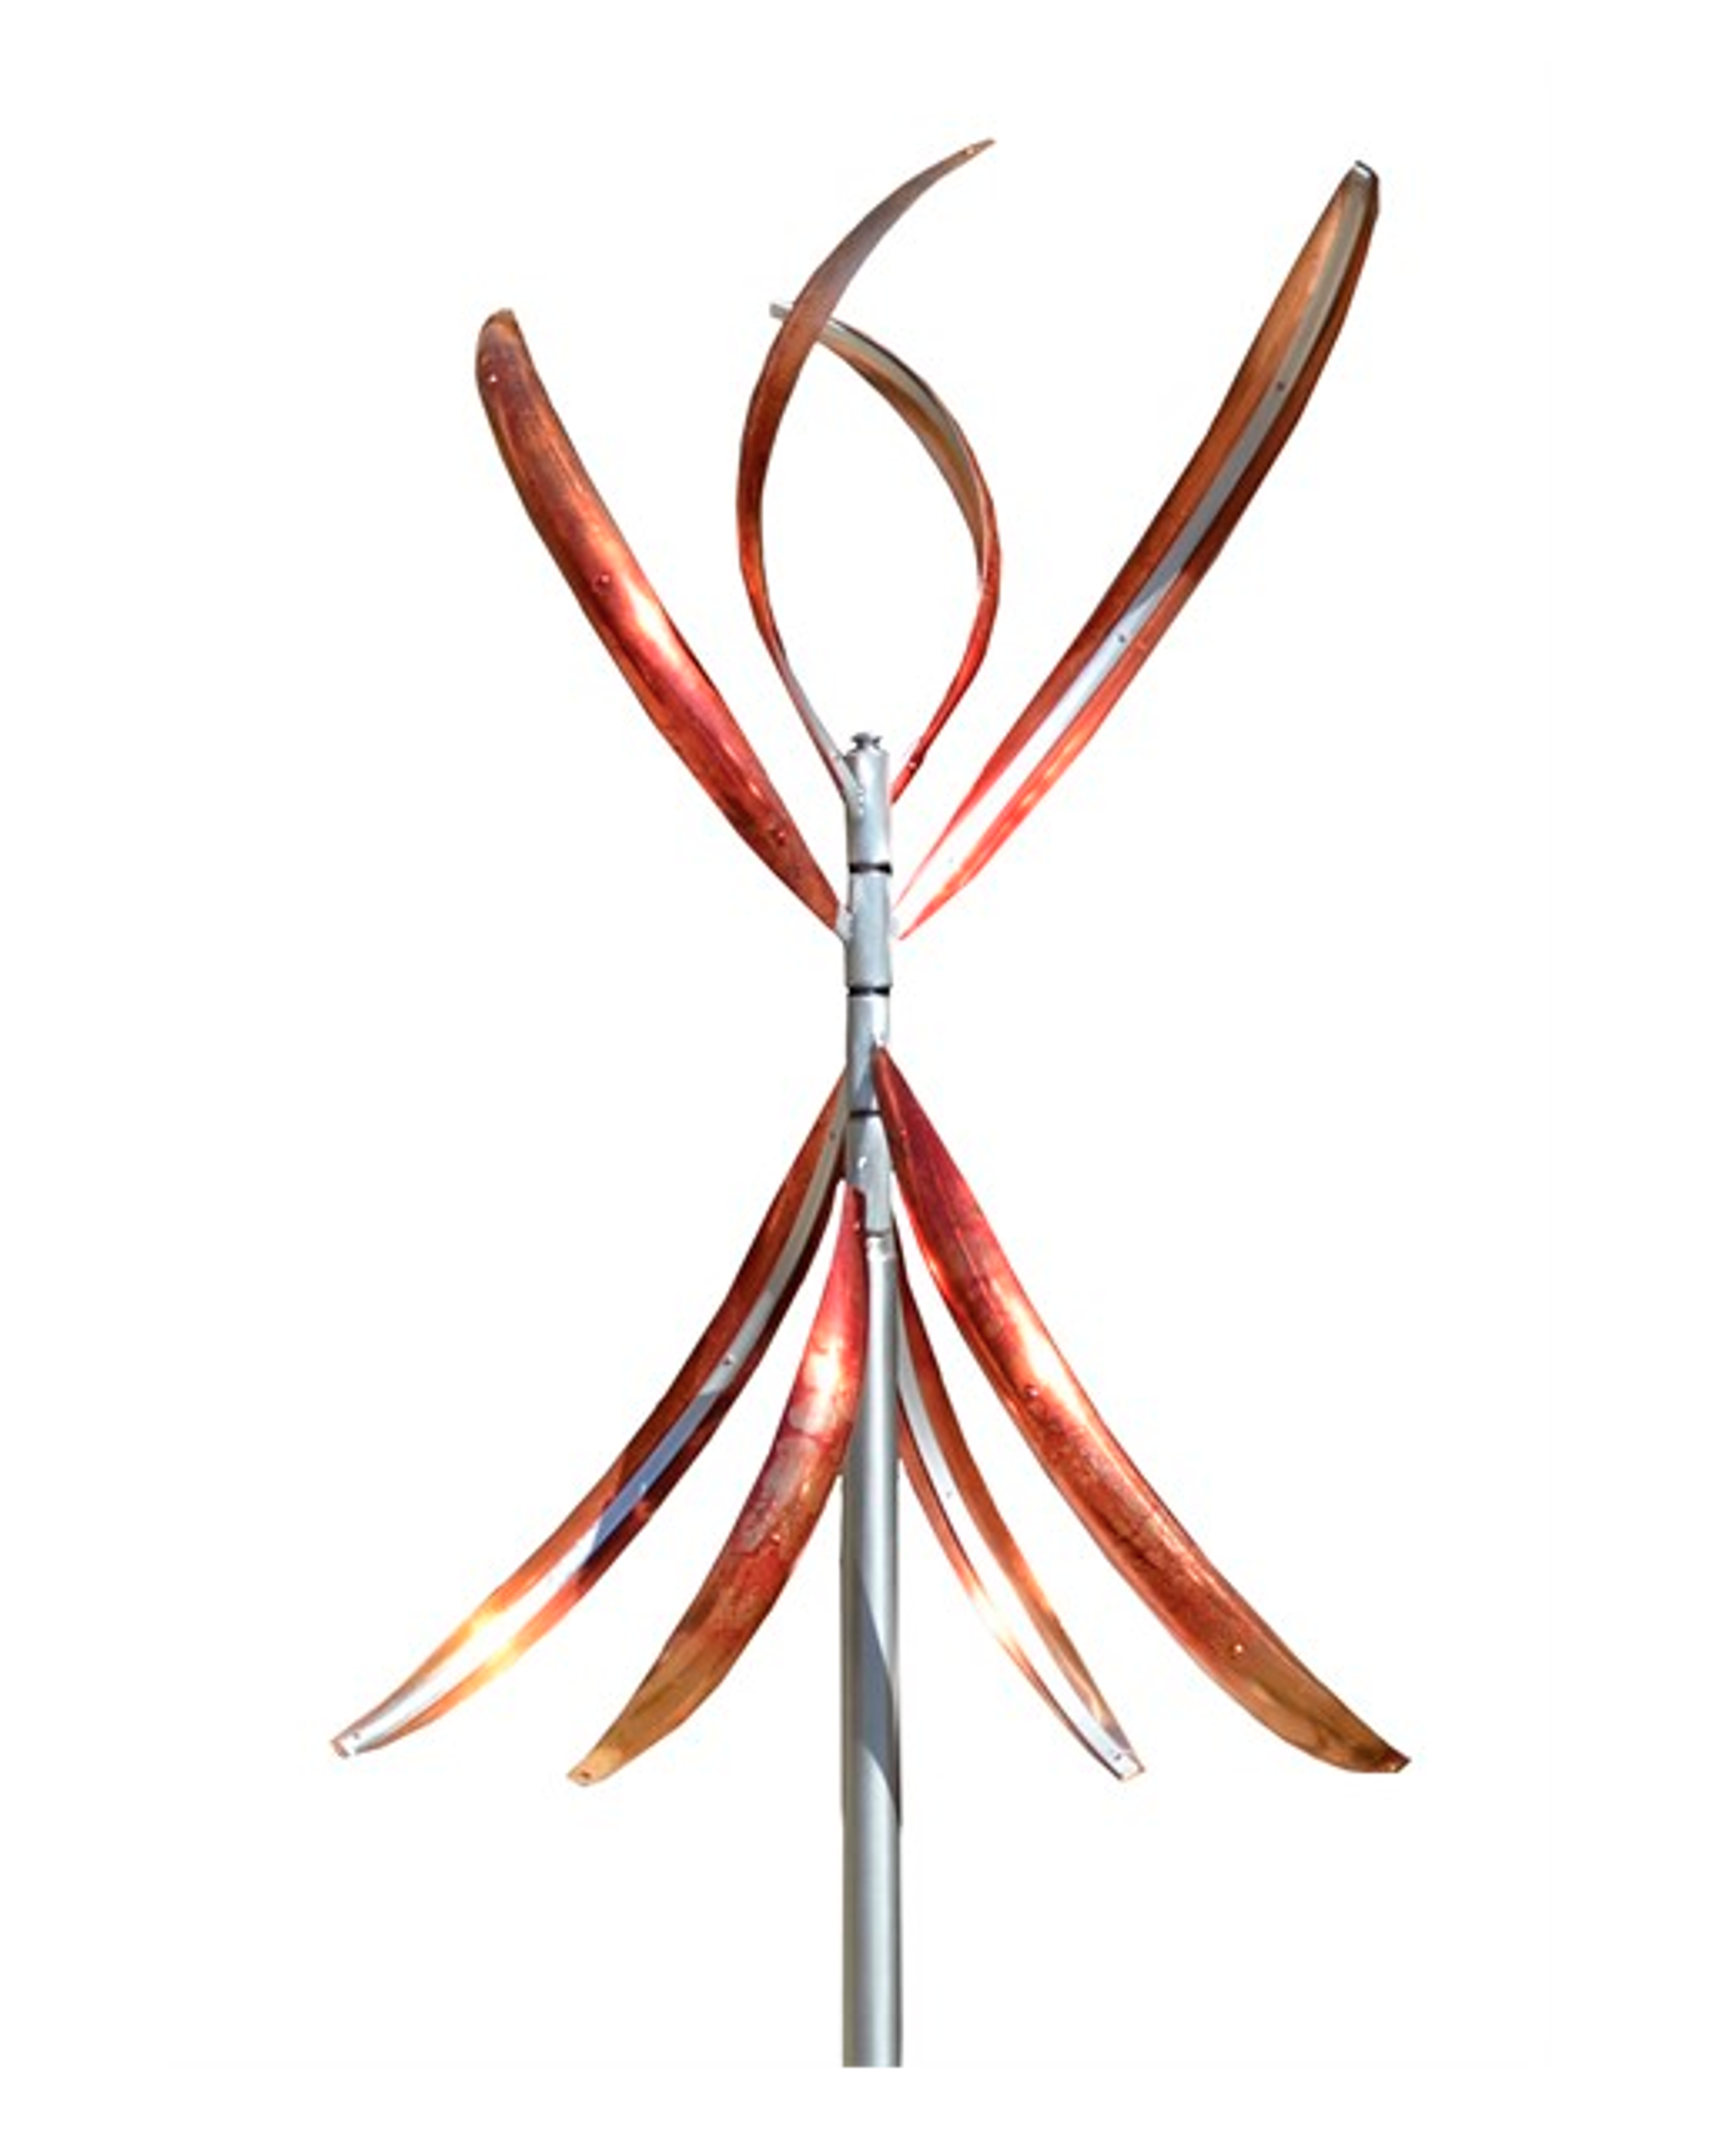 Split Infinity - Available in Colors by Mark White Wind Sculpture